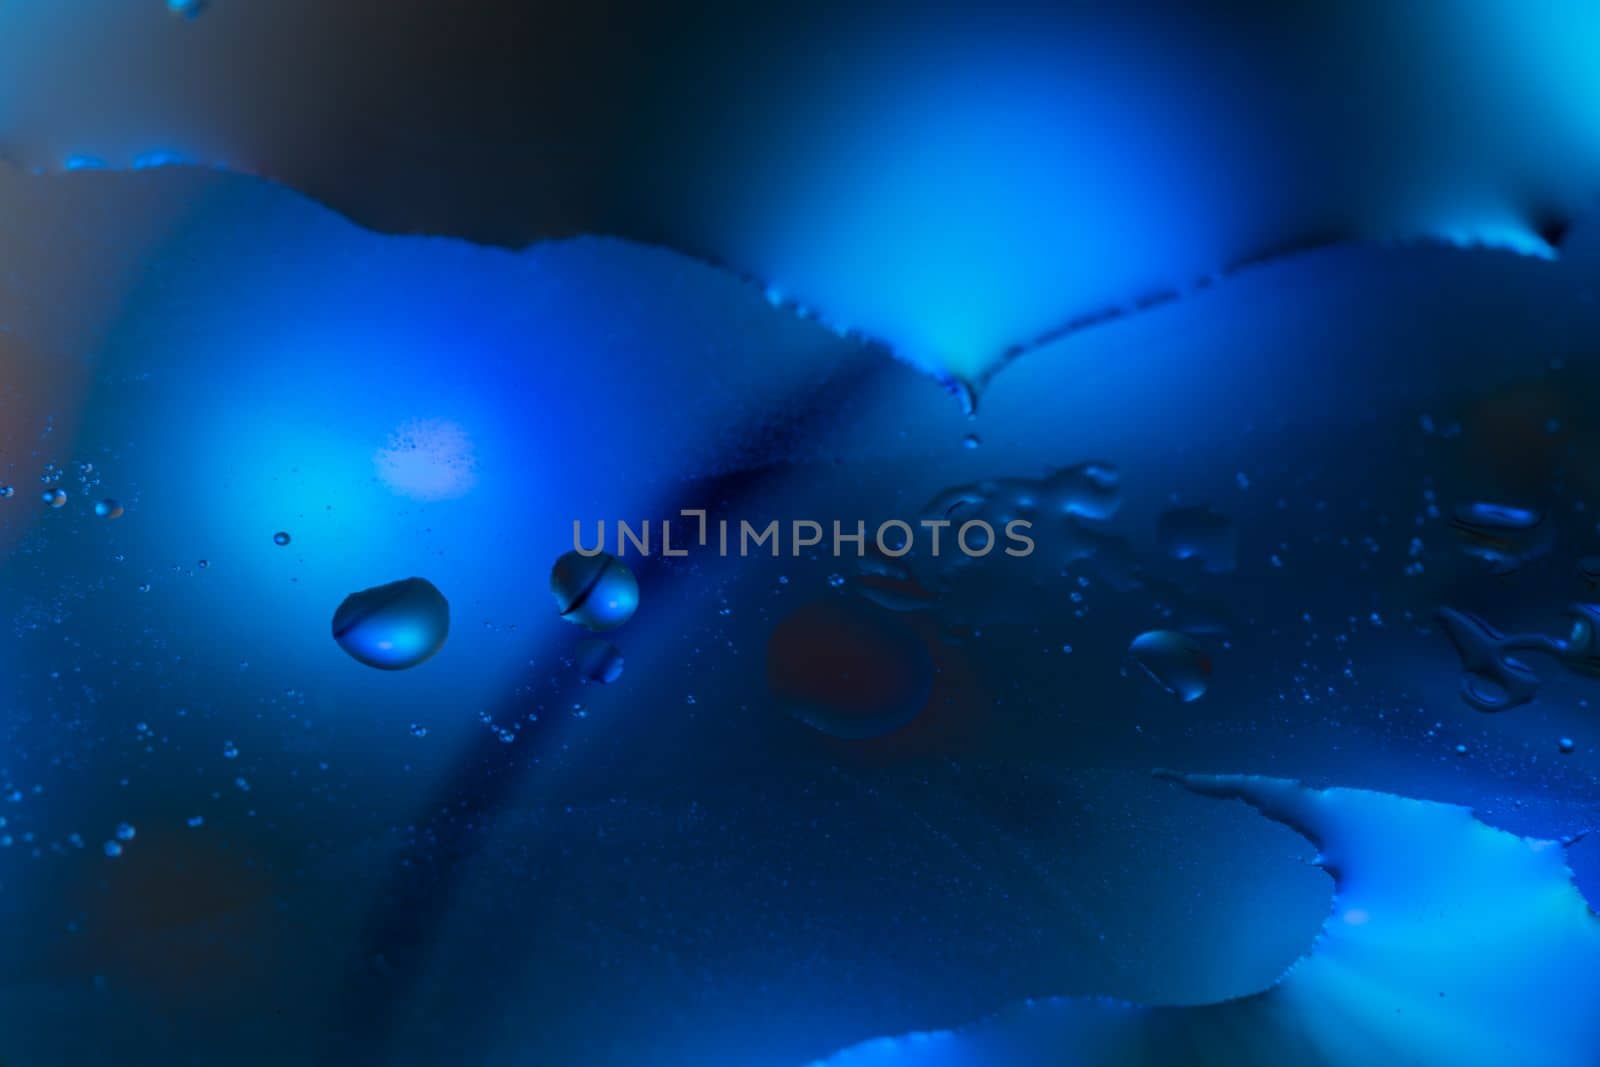 Circles of oil in water with a blue background abstract macro by exndiver